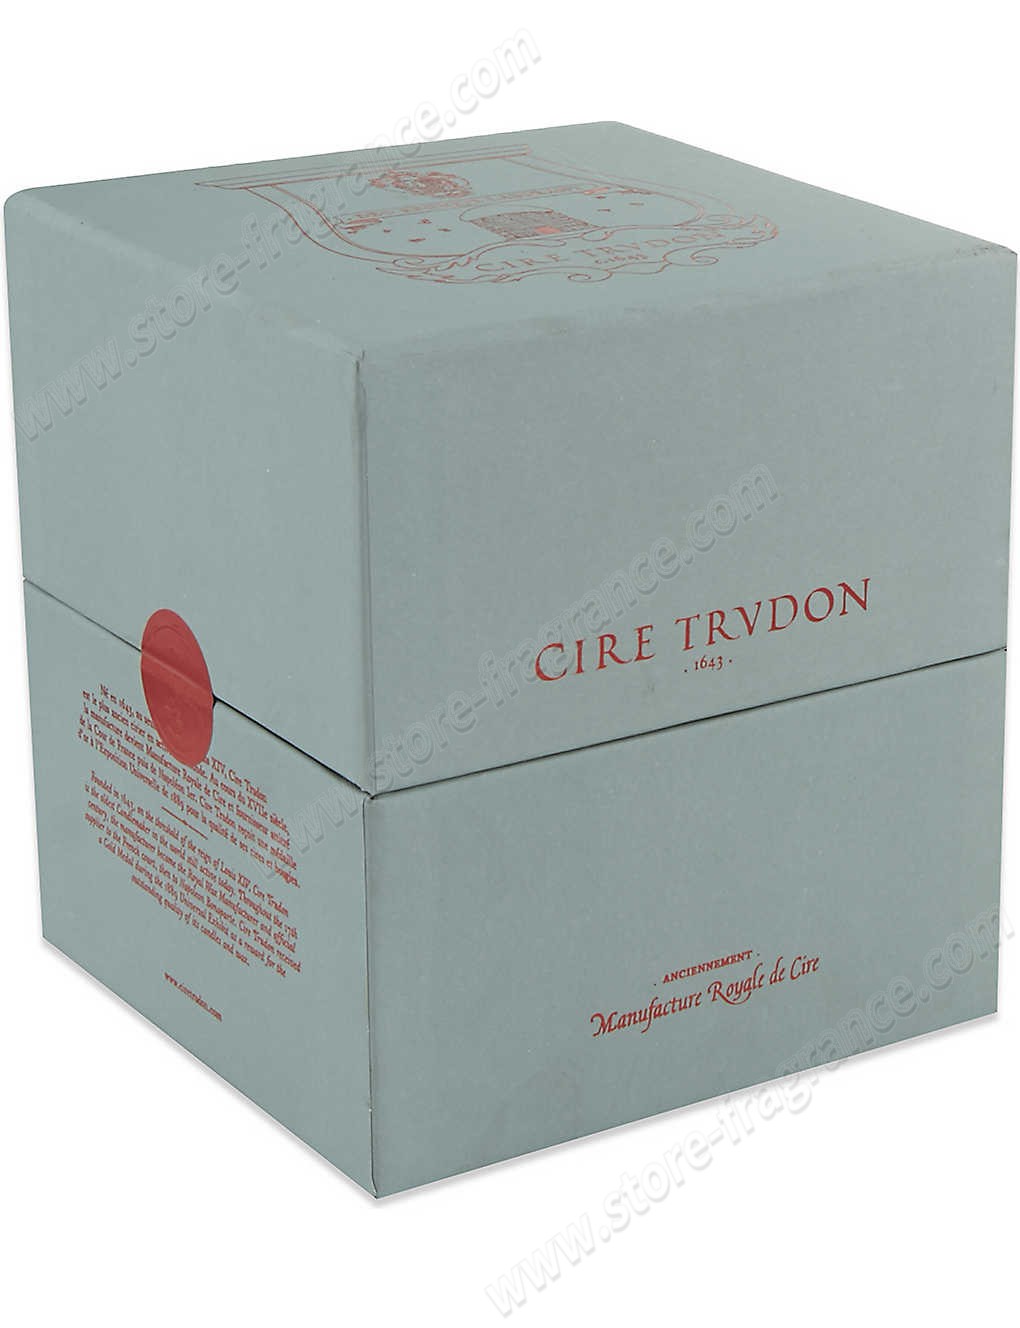 CIRE TRUDON/Abd El Kader scented candle 800g ✿ Discount Store - -1